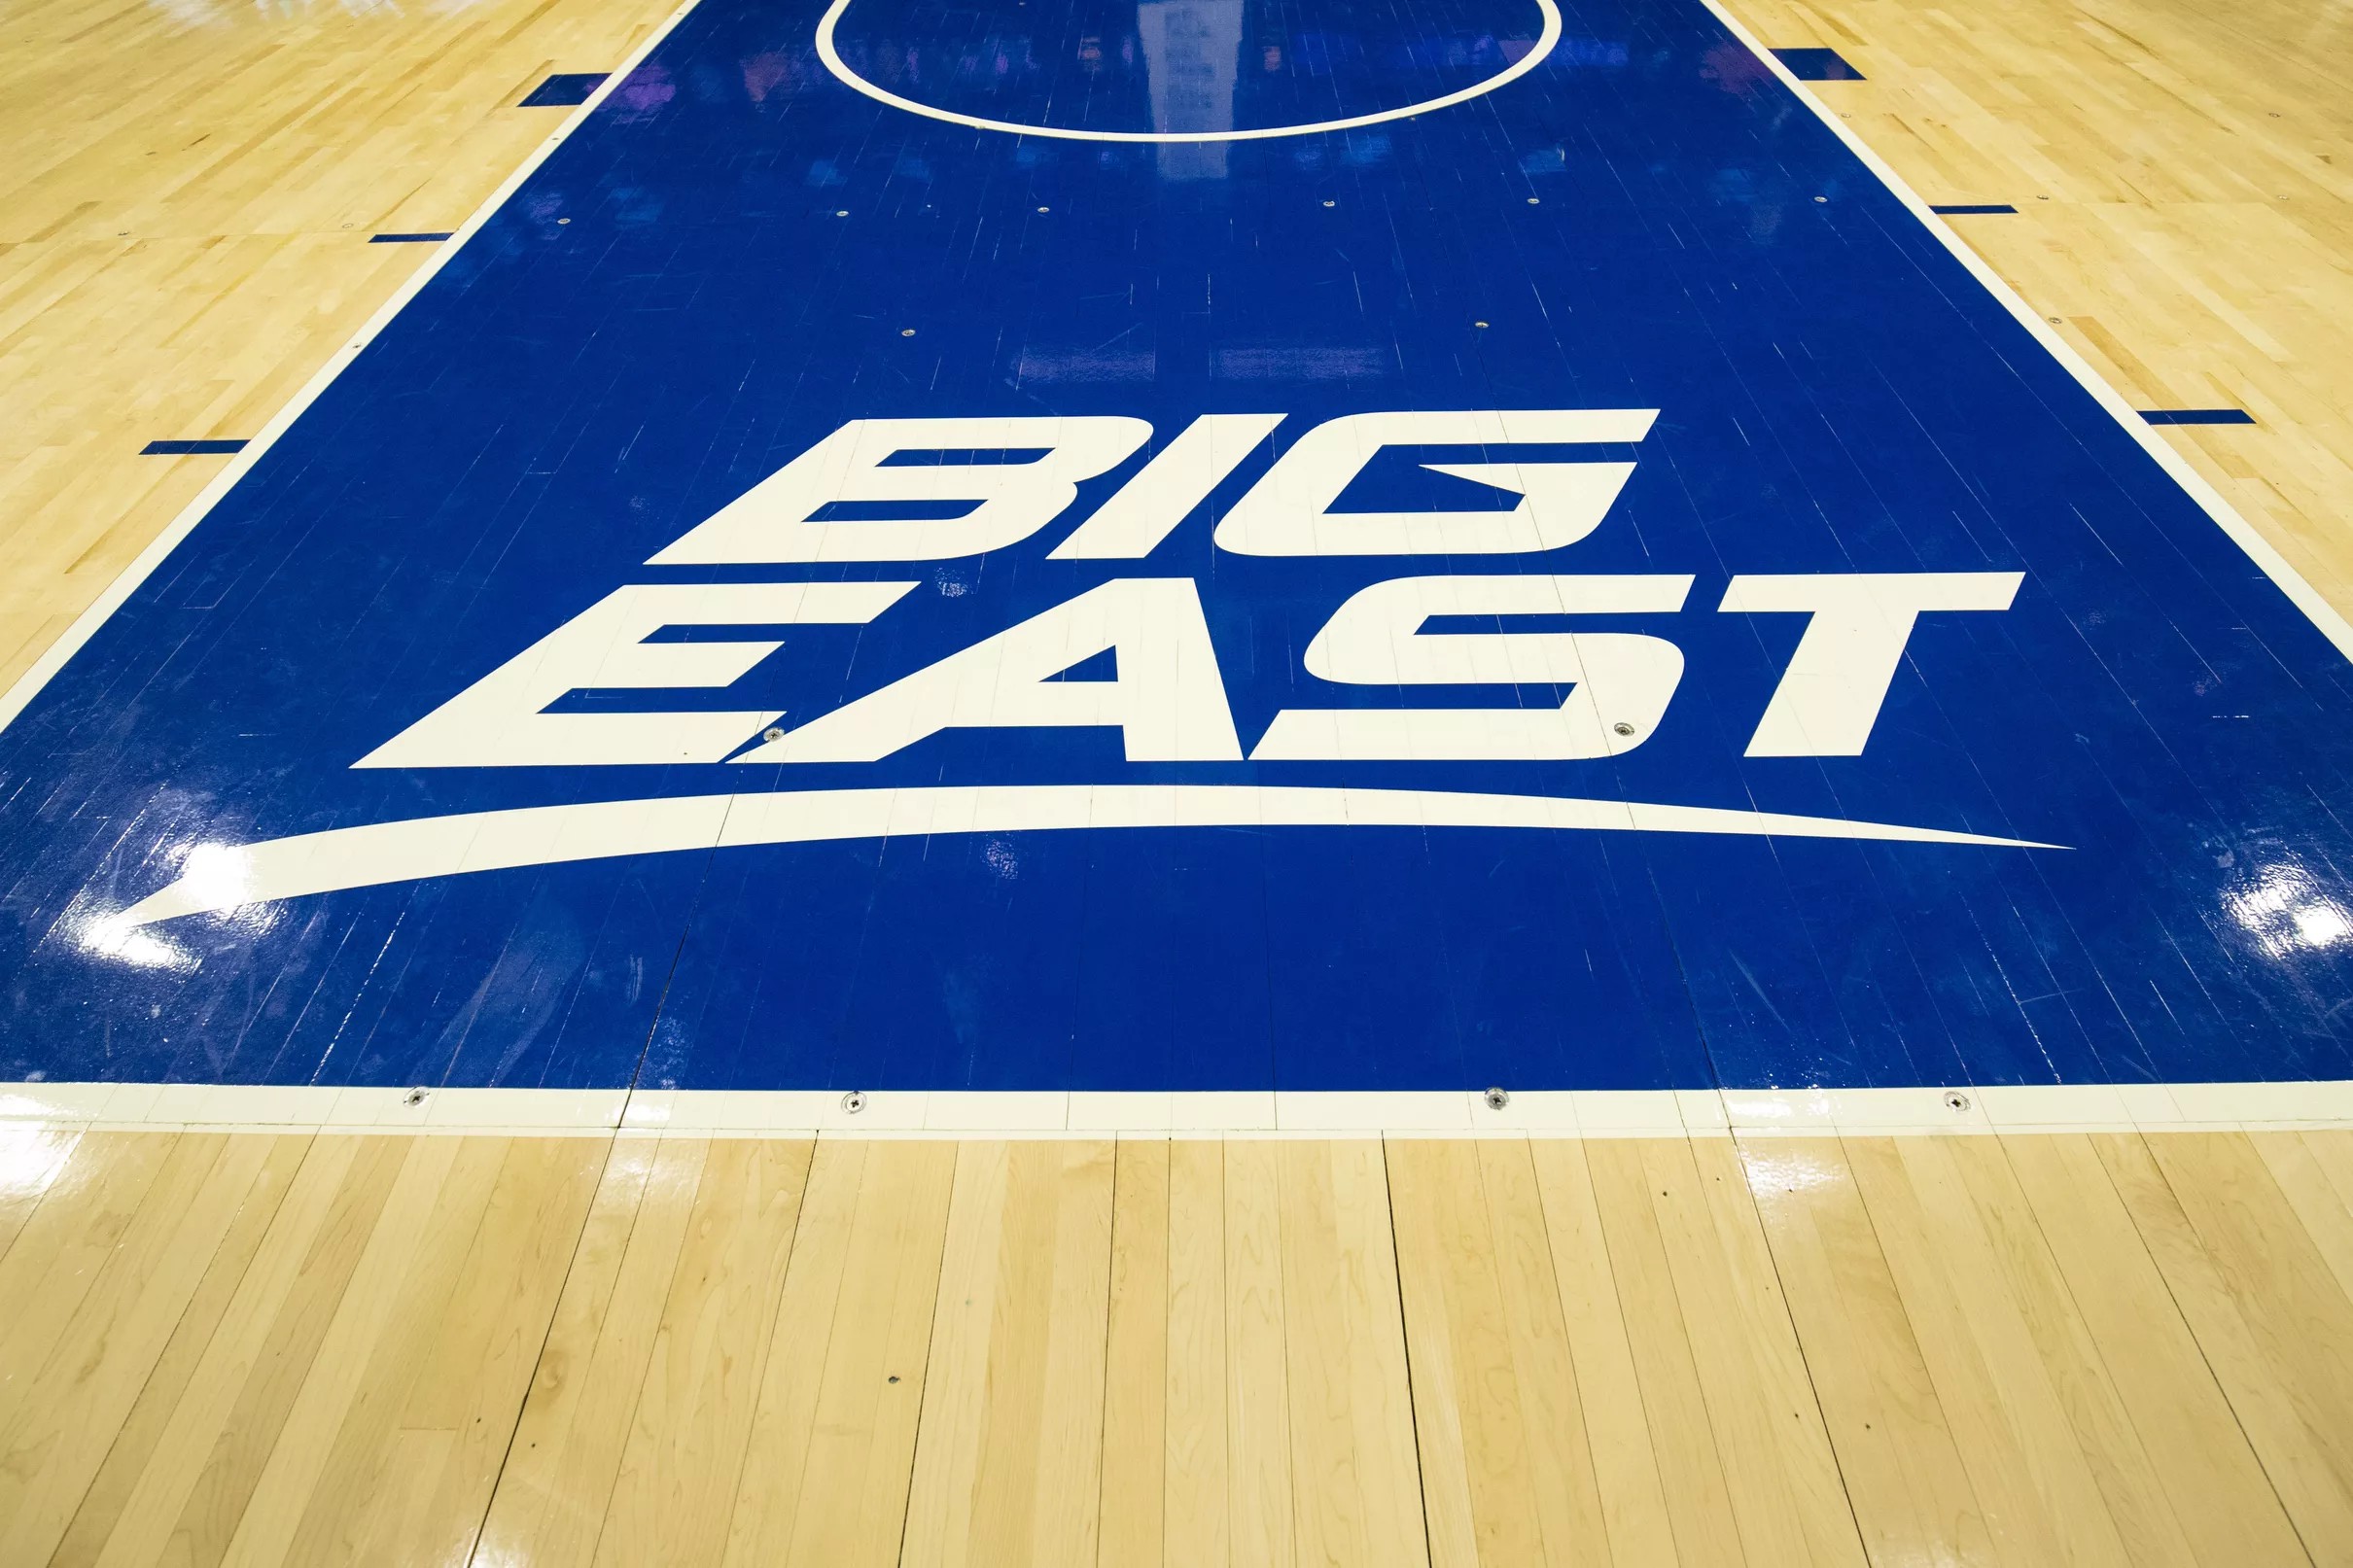 201819 Big East Men’s Basketball Where Are We Now?